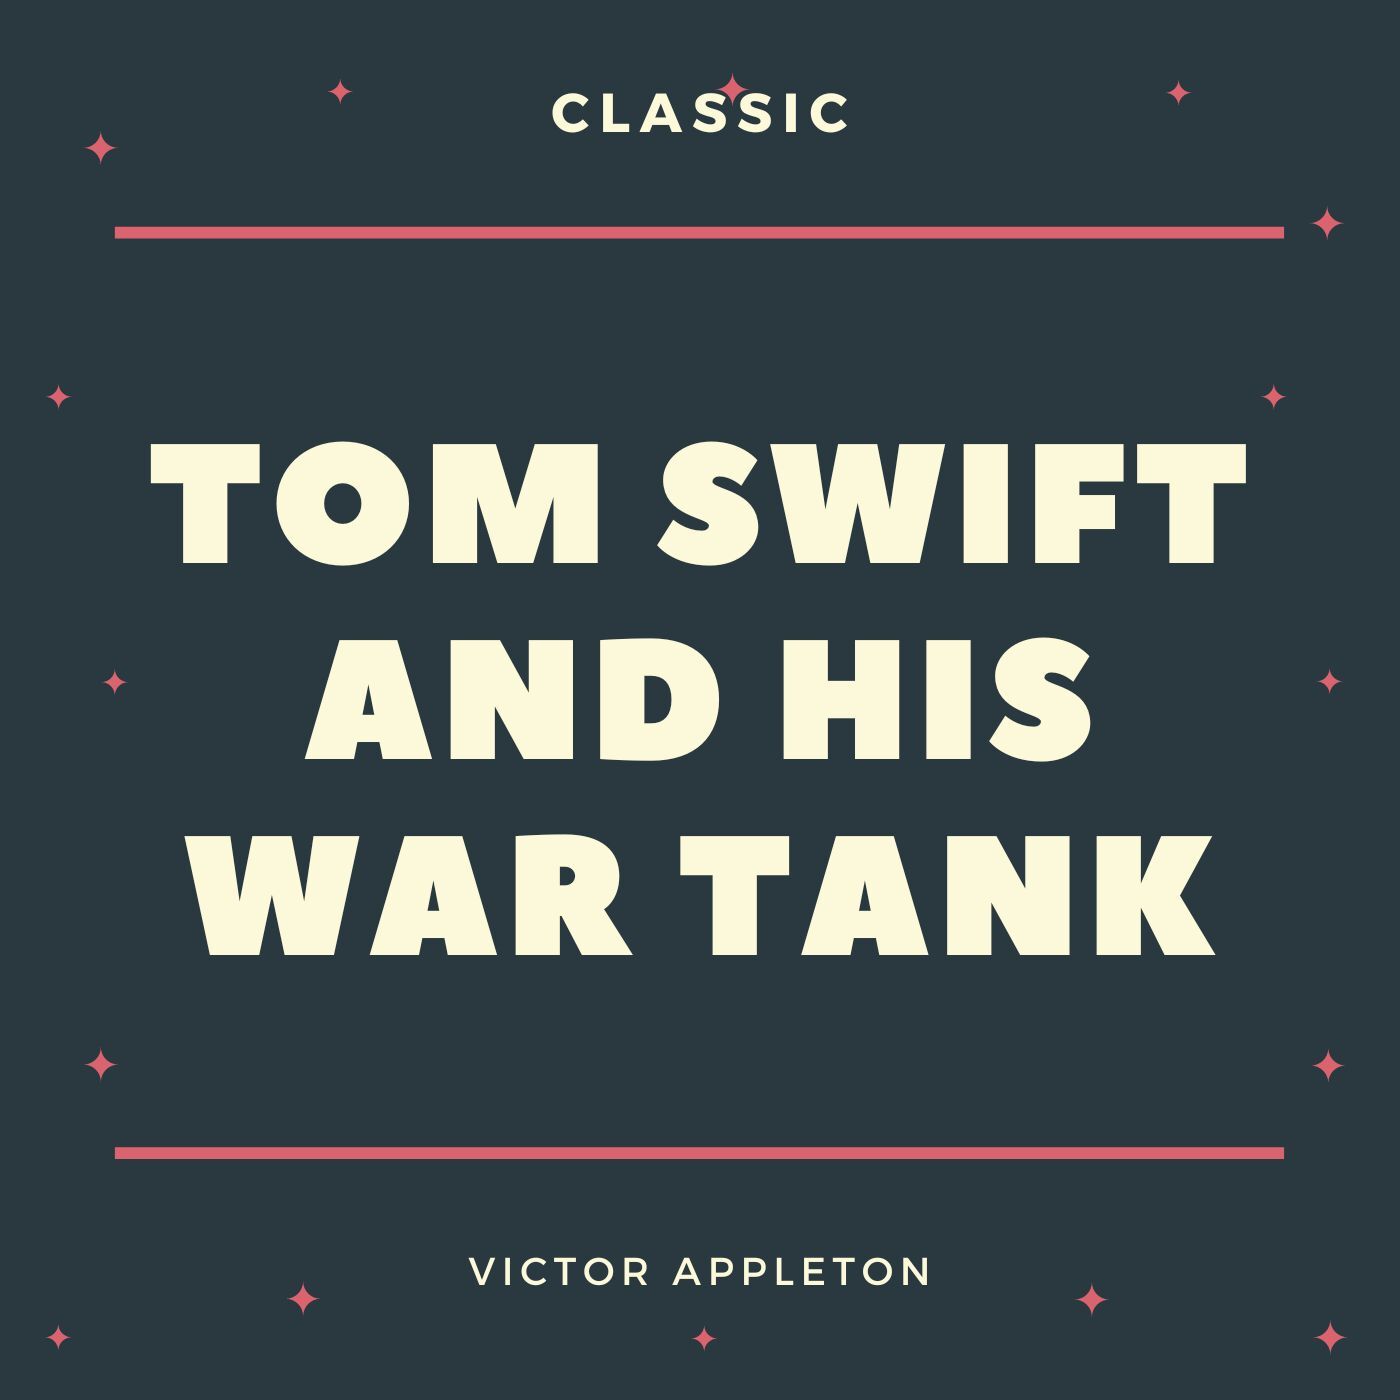 Tom Swift and His War Tank by Victor Appleton